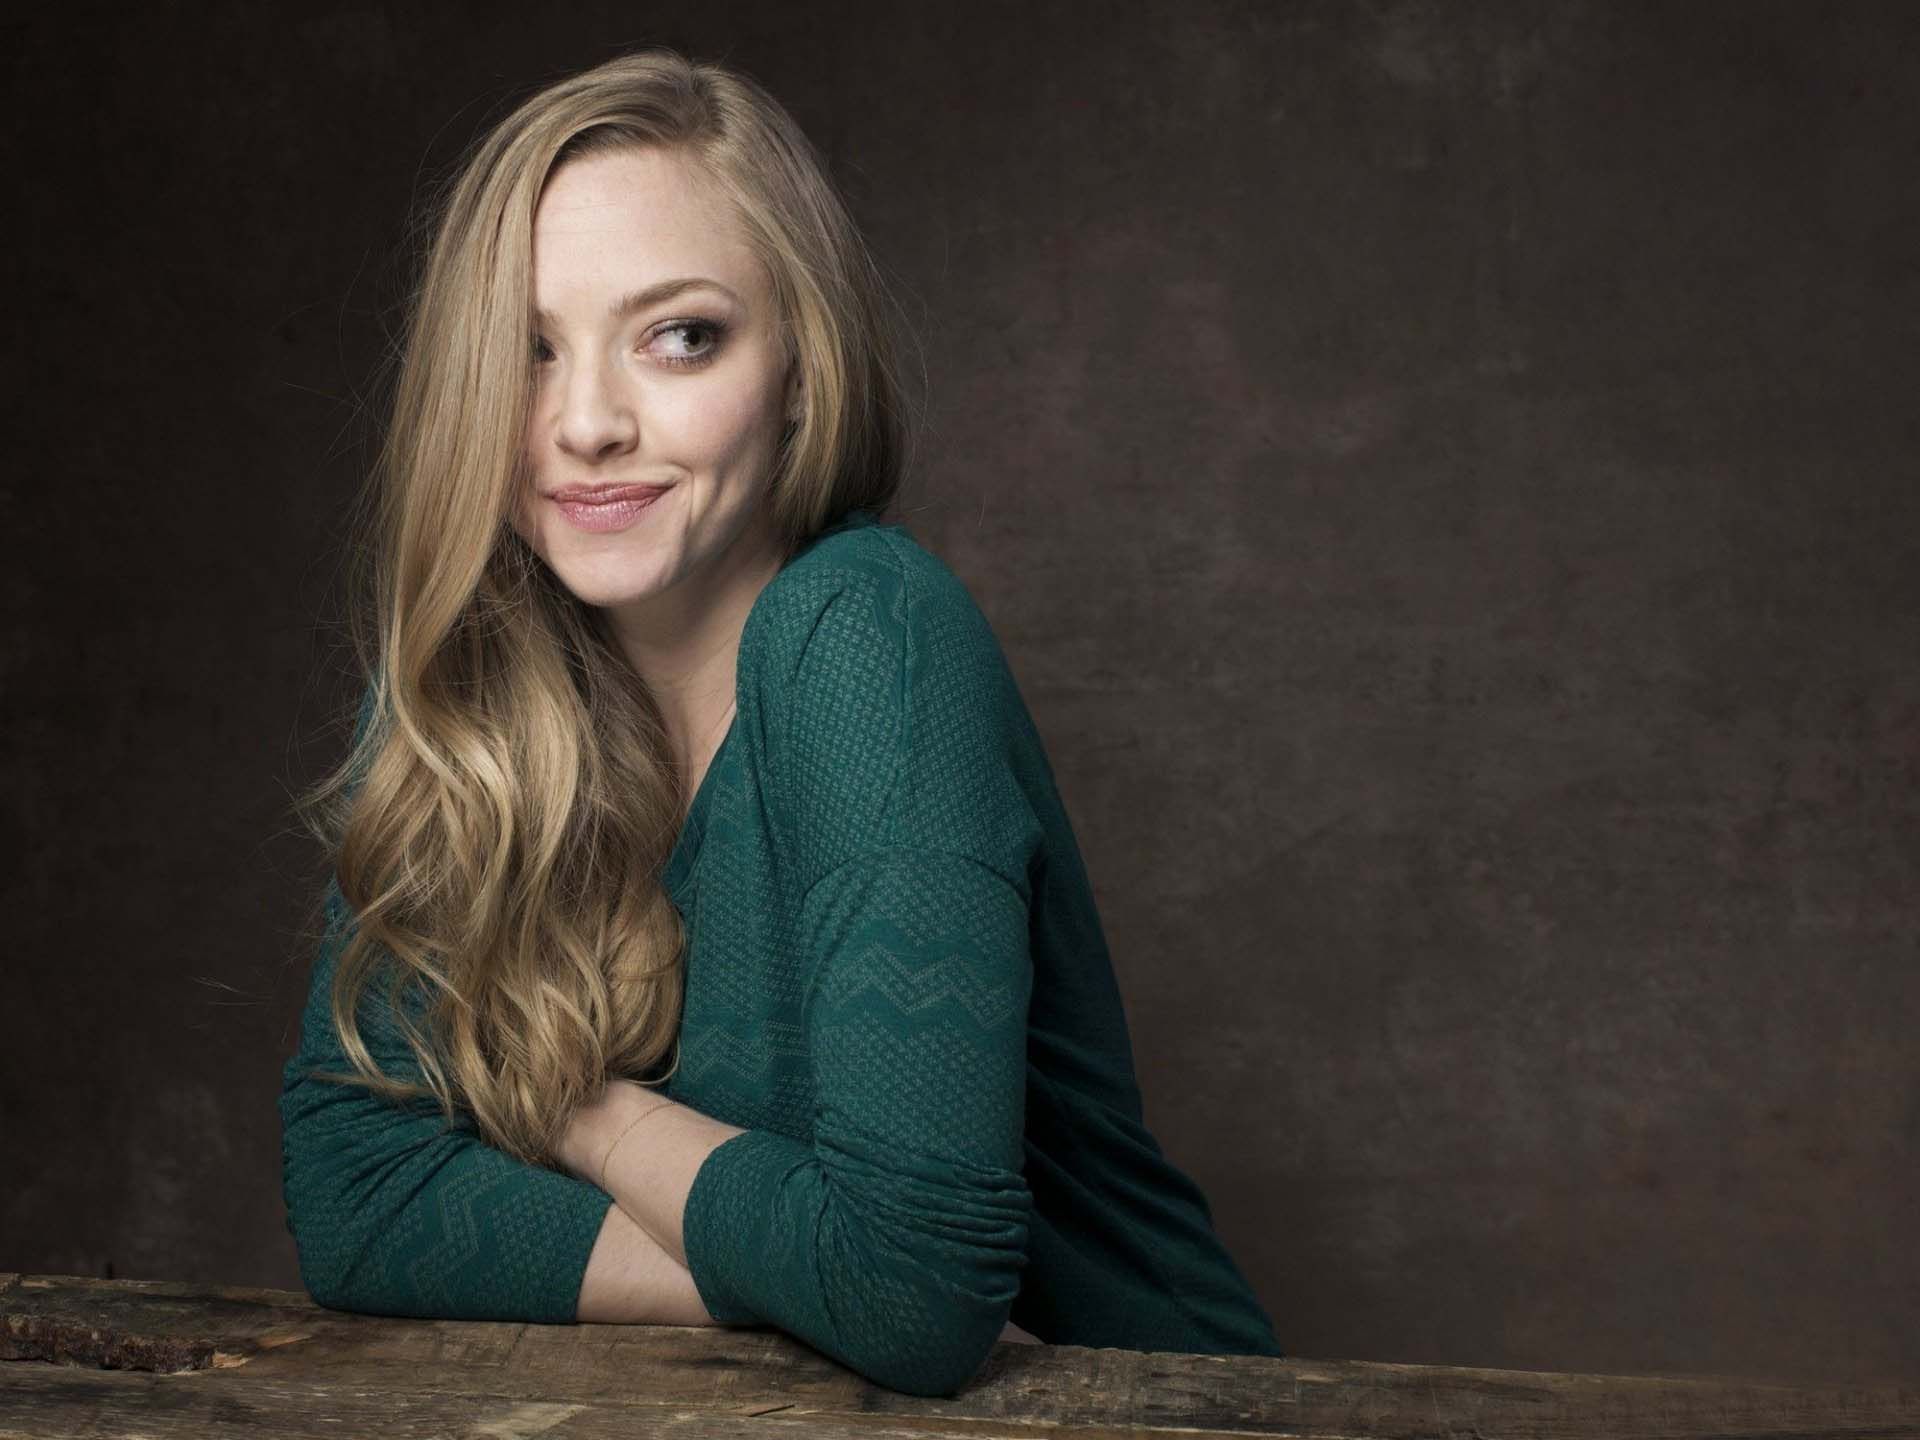 amanda seyfried cute laptop download free pictures